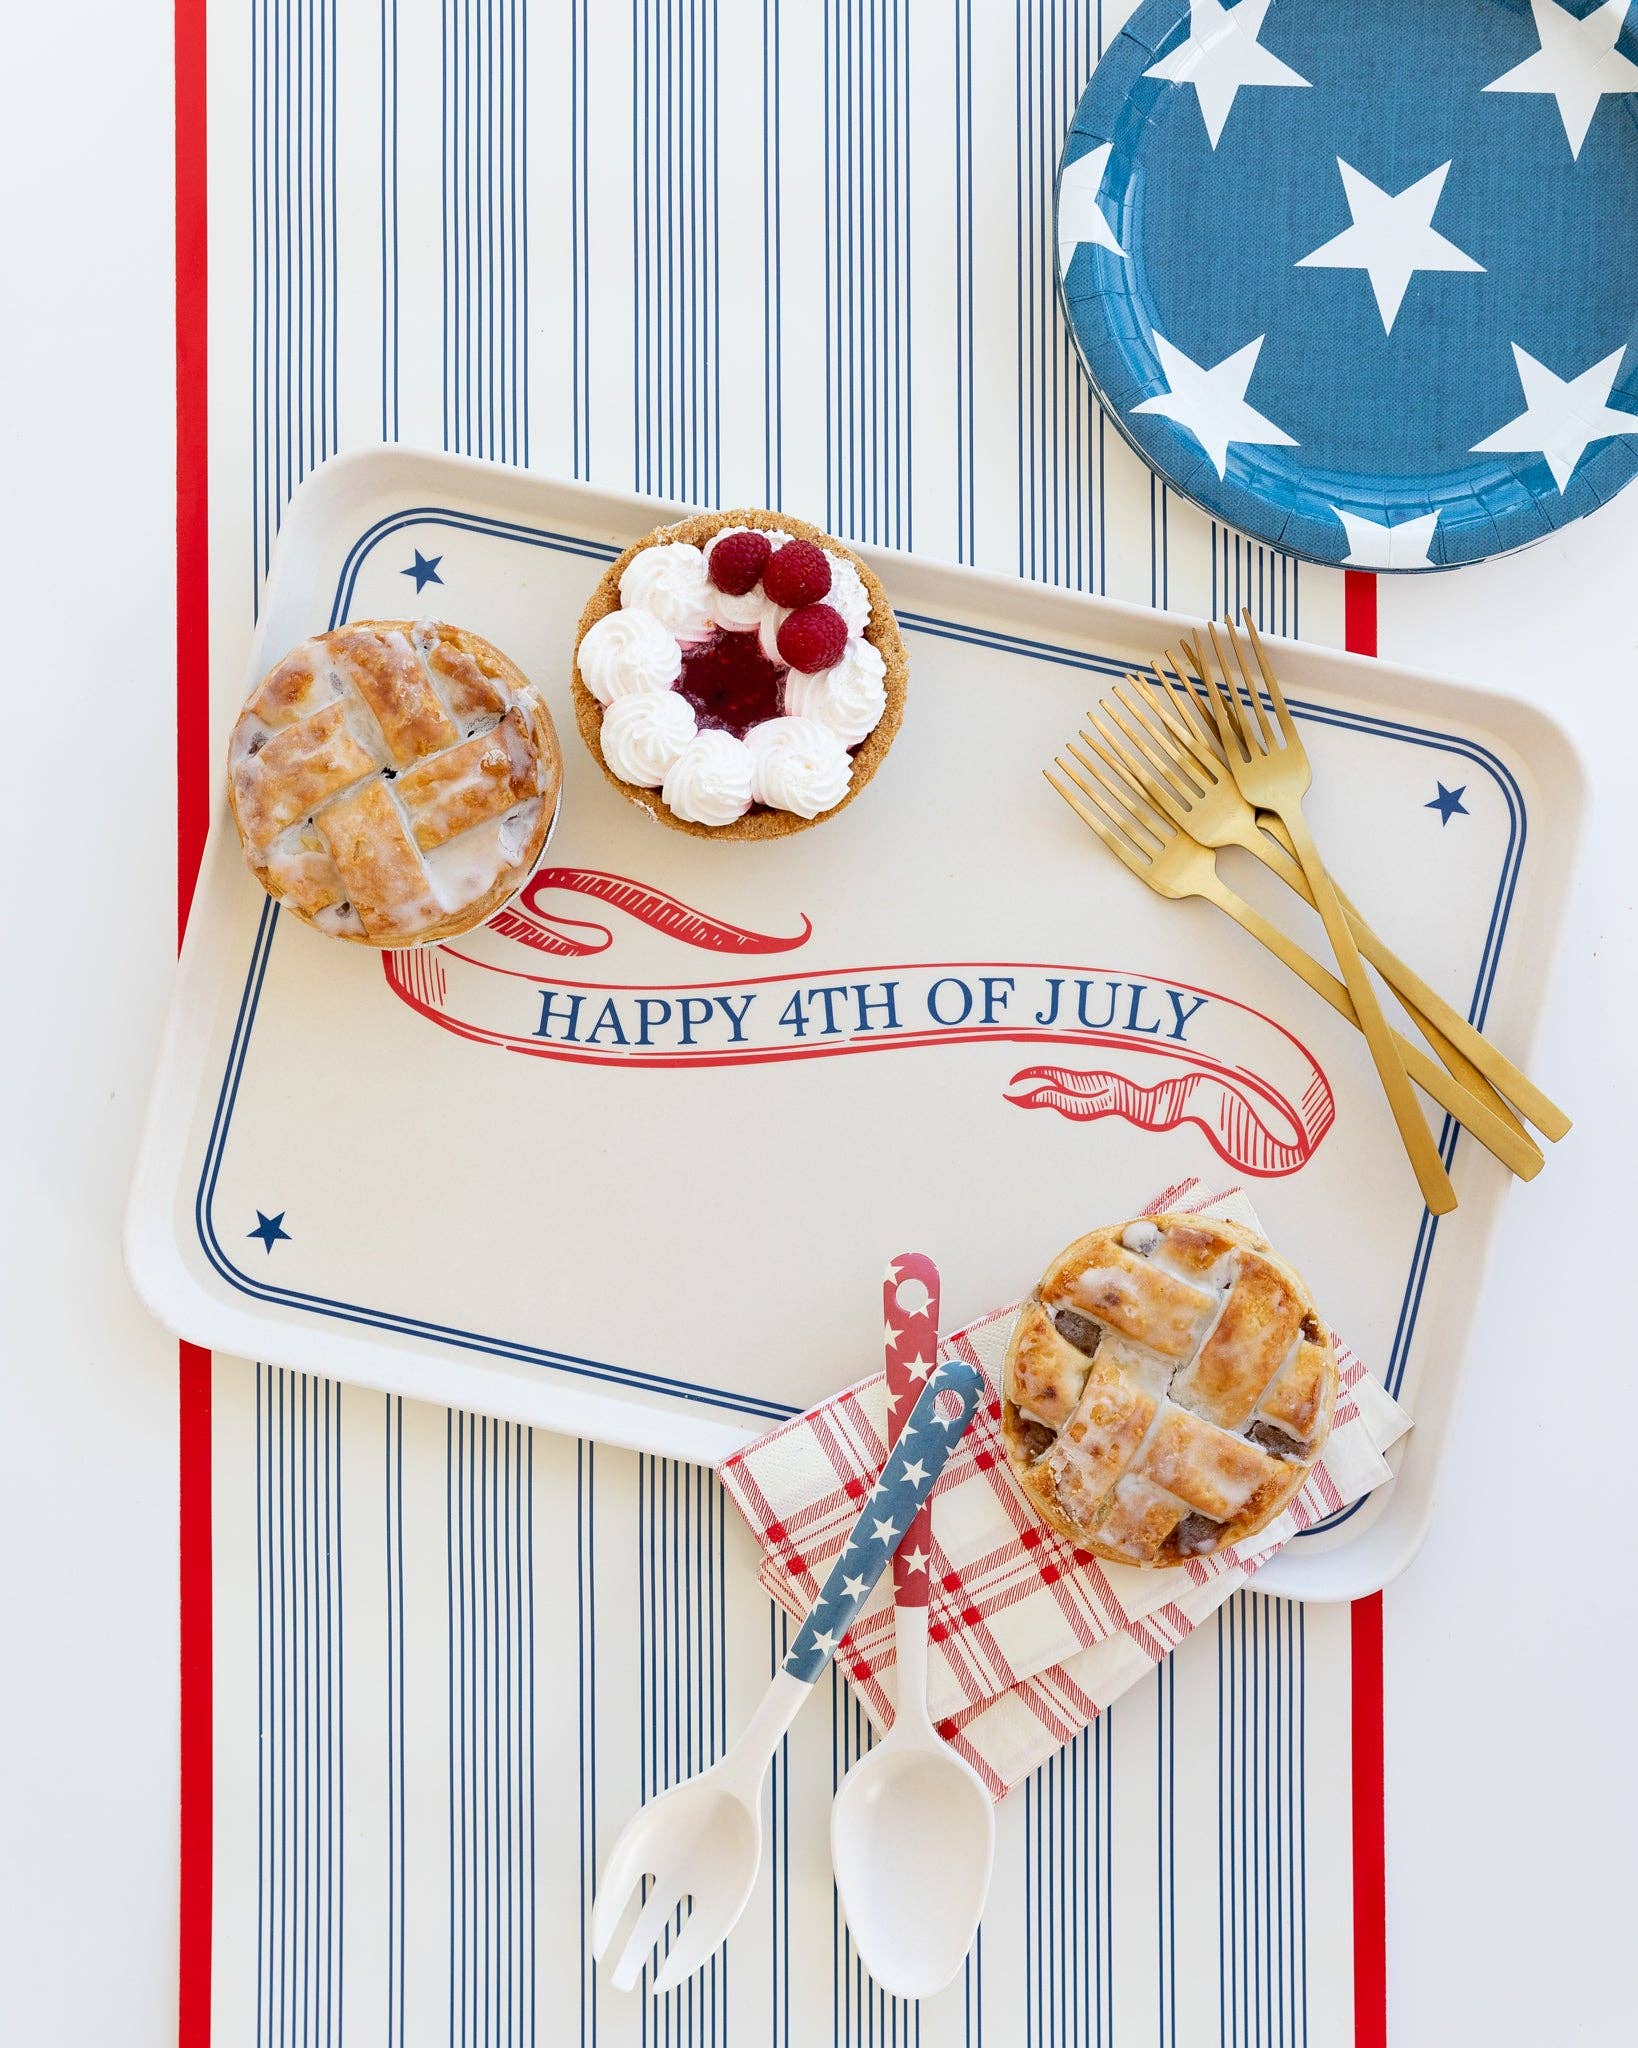 Happy 4th of July Reusable Bamboo Serving Tray - The Preppy Bunny